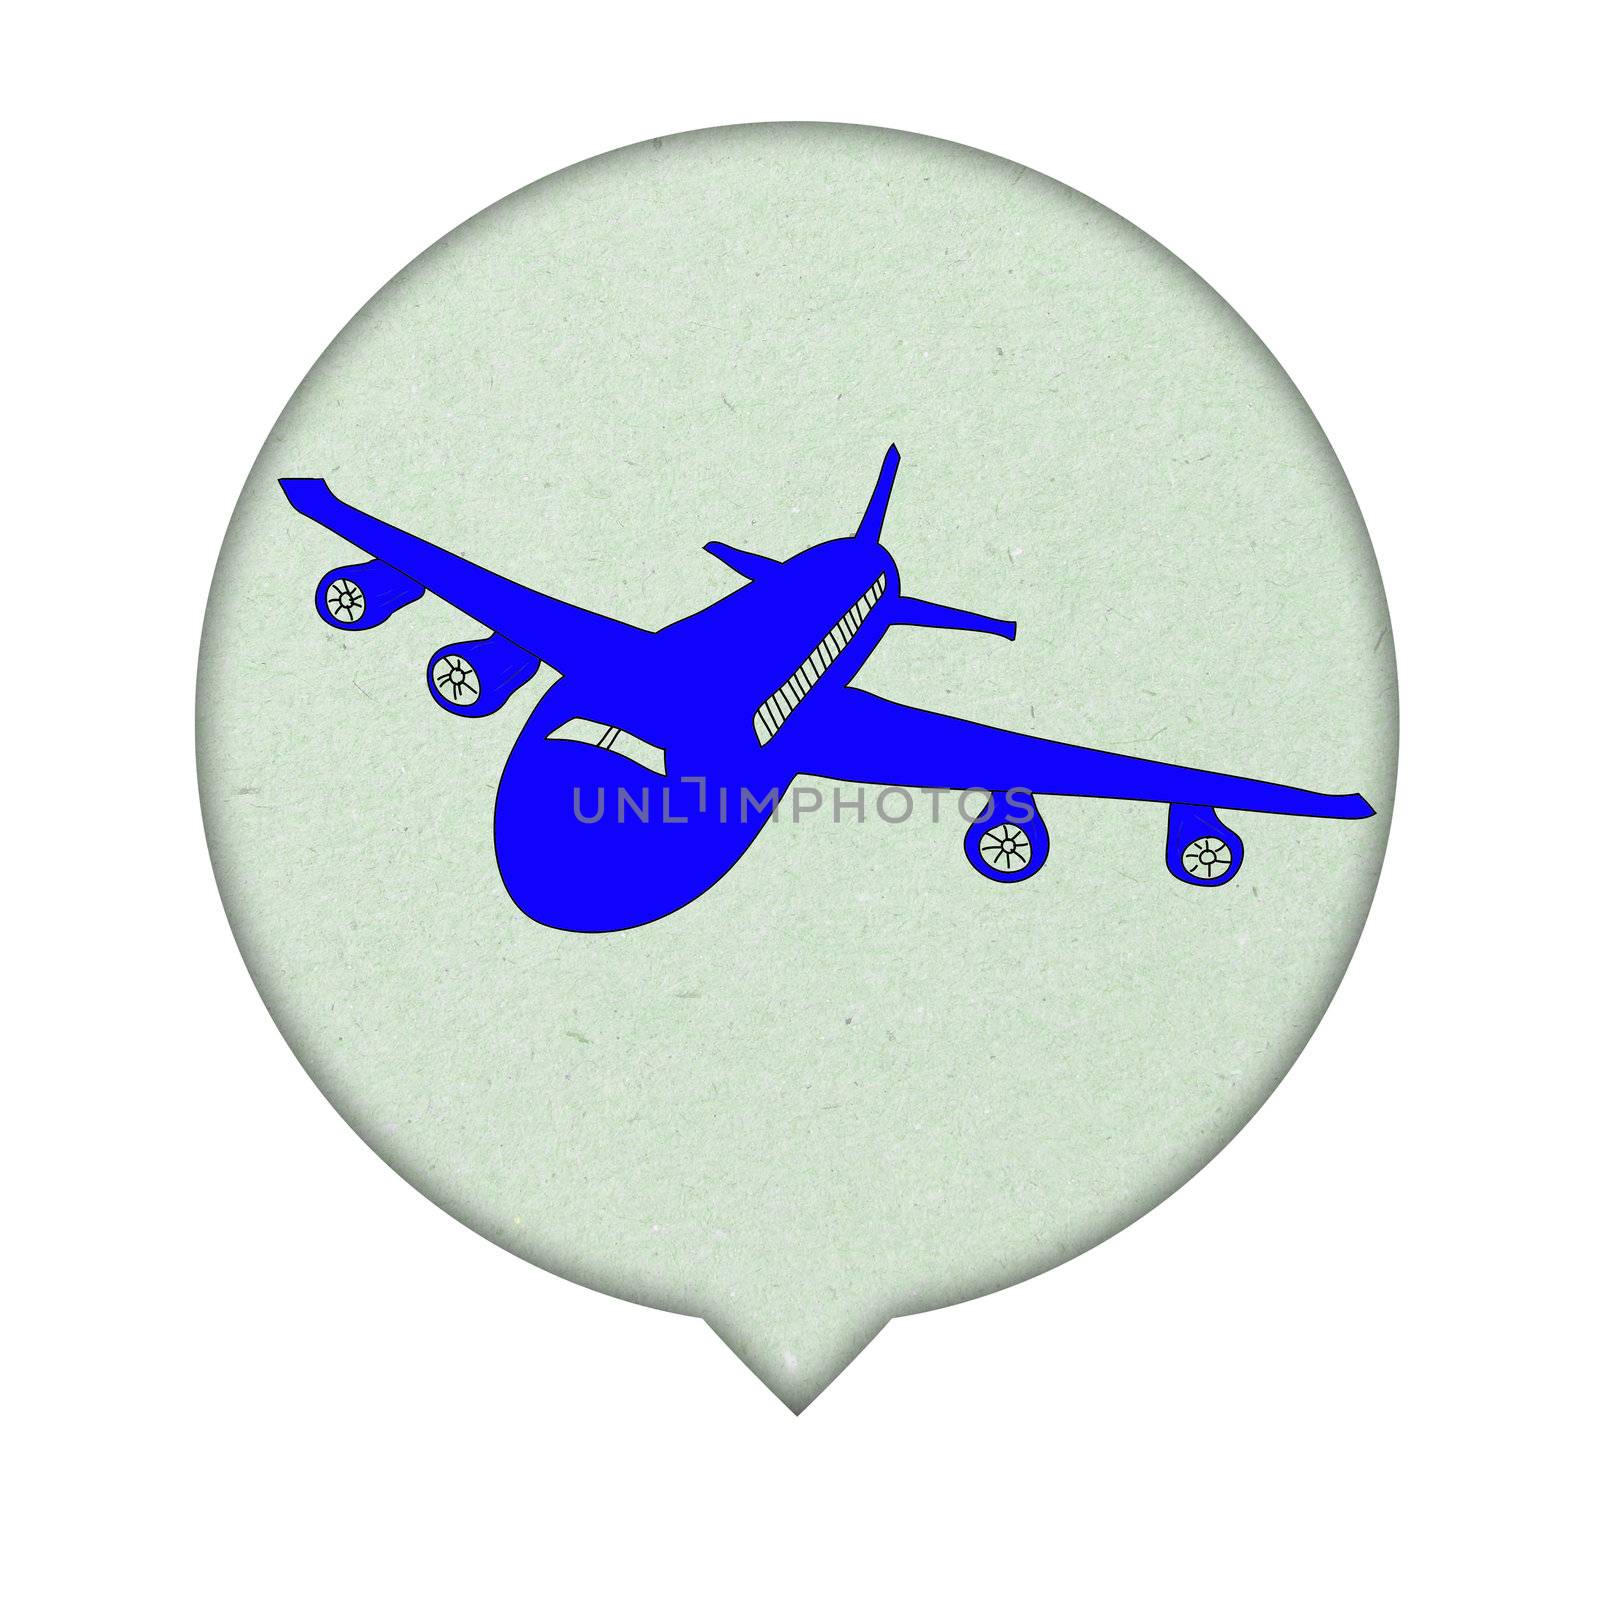 Airplane Sign icon on paper  background